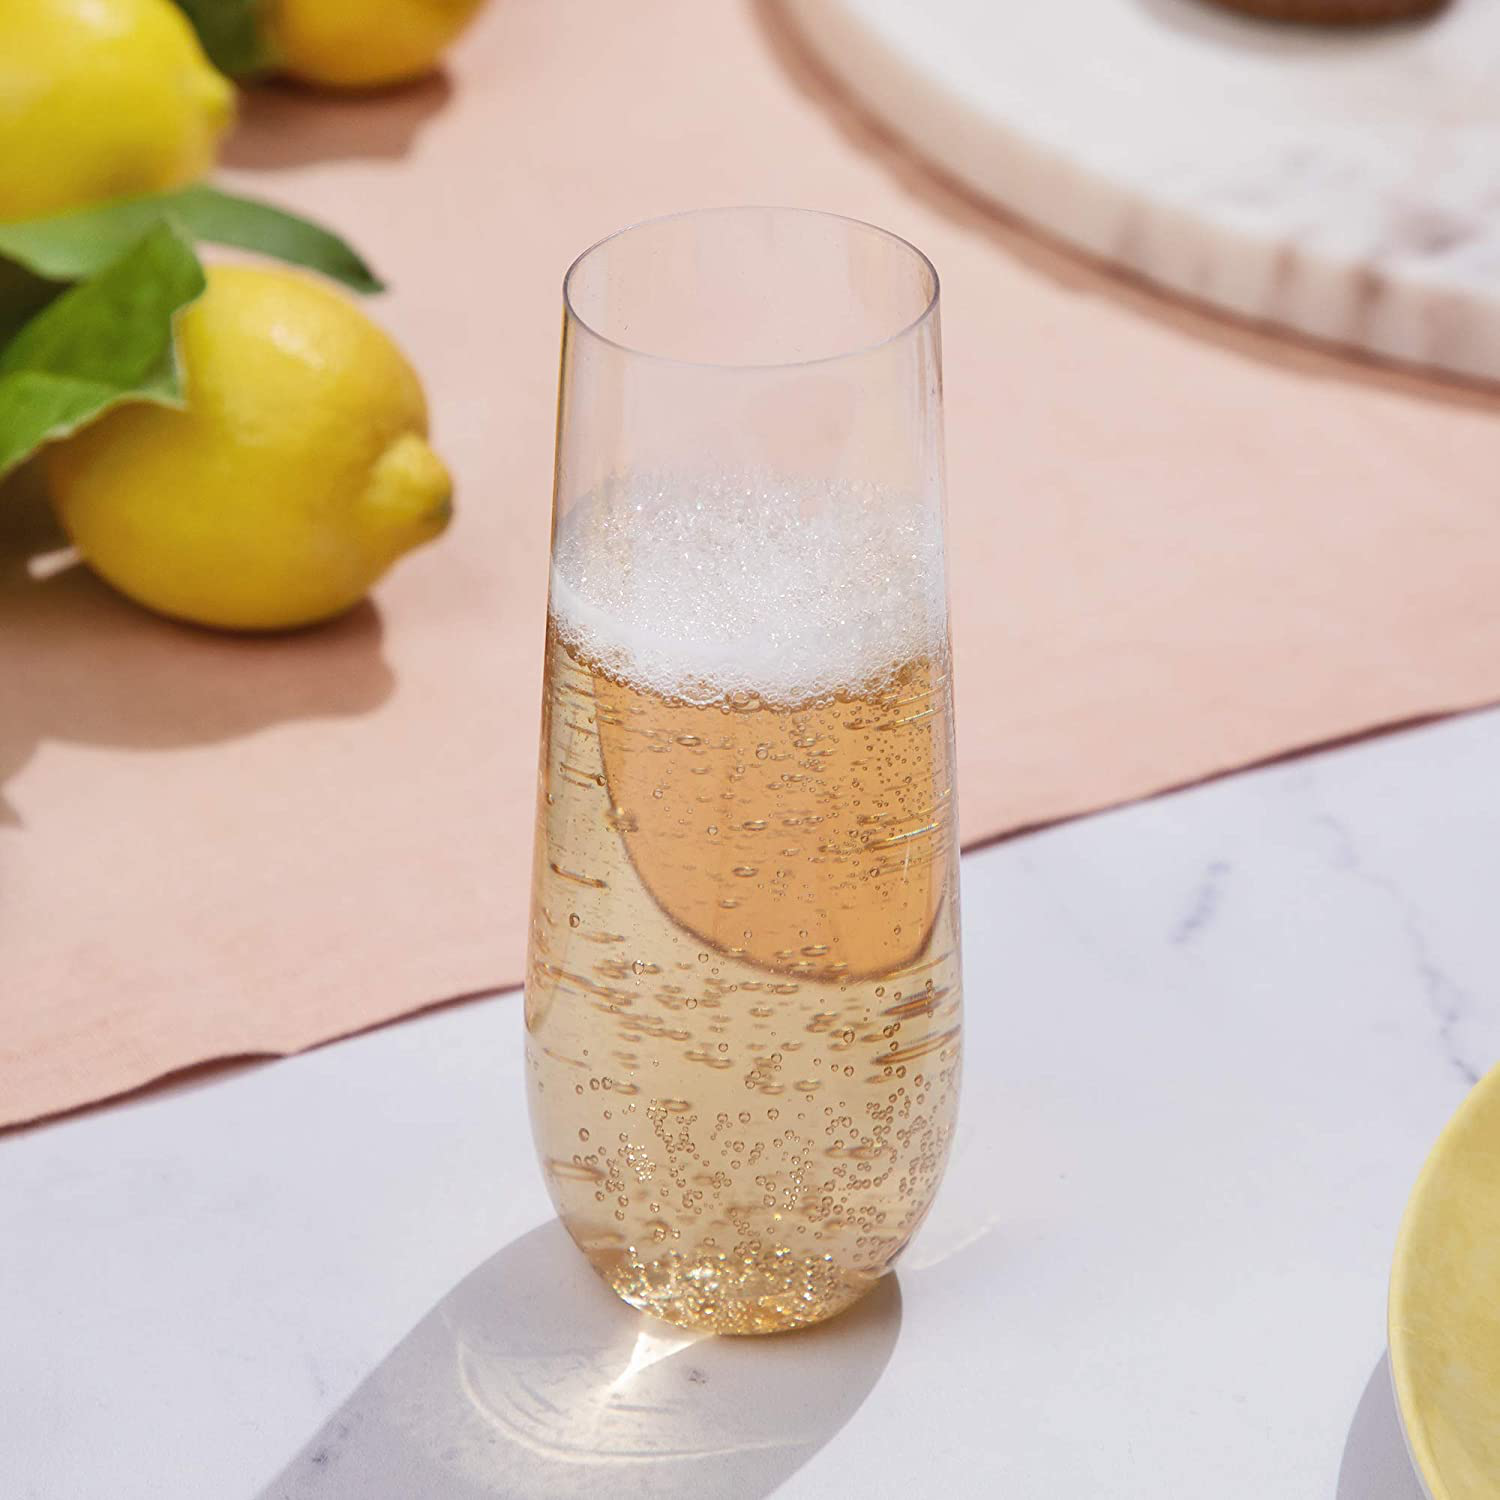 24 Stemless Plastic Champagne Flutes - 9 Oz Plastic Champagne Glasses | Clear Plastic Unbreakable | Toasting Glasses | Shatterproof | Disposable | Reusable Perfect For Wedding Or Party